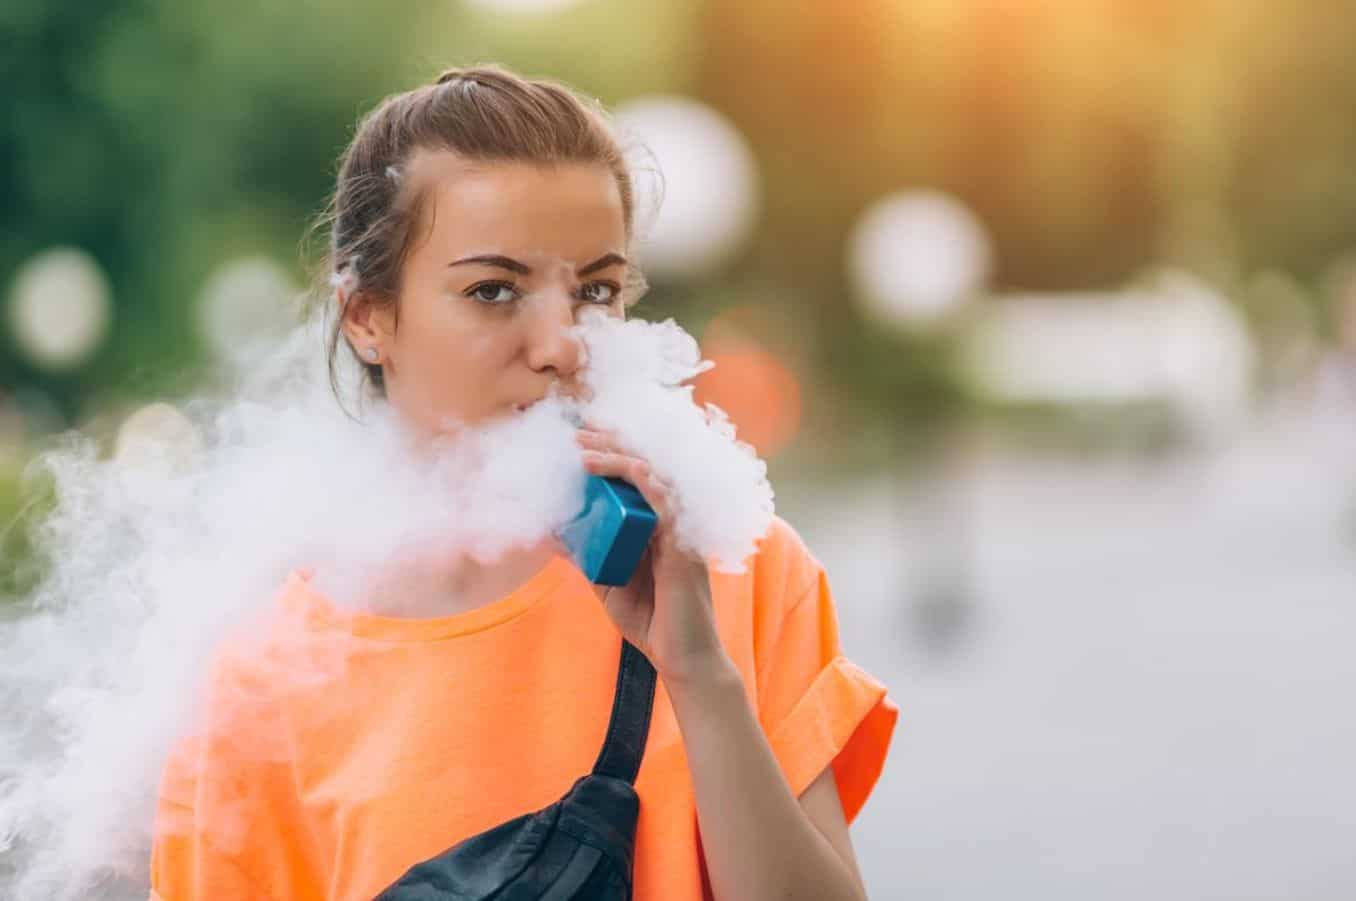 Vaping: This is What E-cigarettes Doing to Your Health in the Short Term